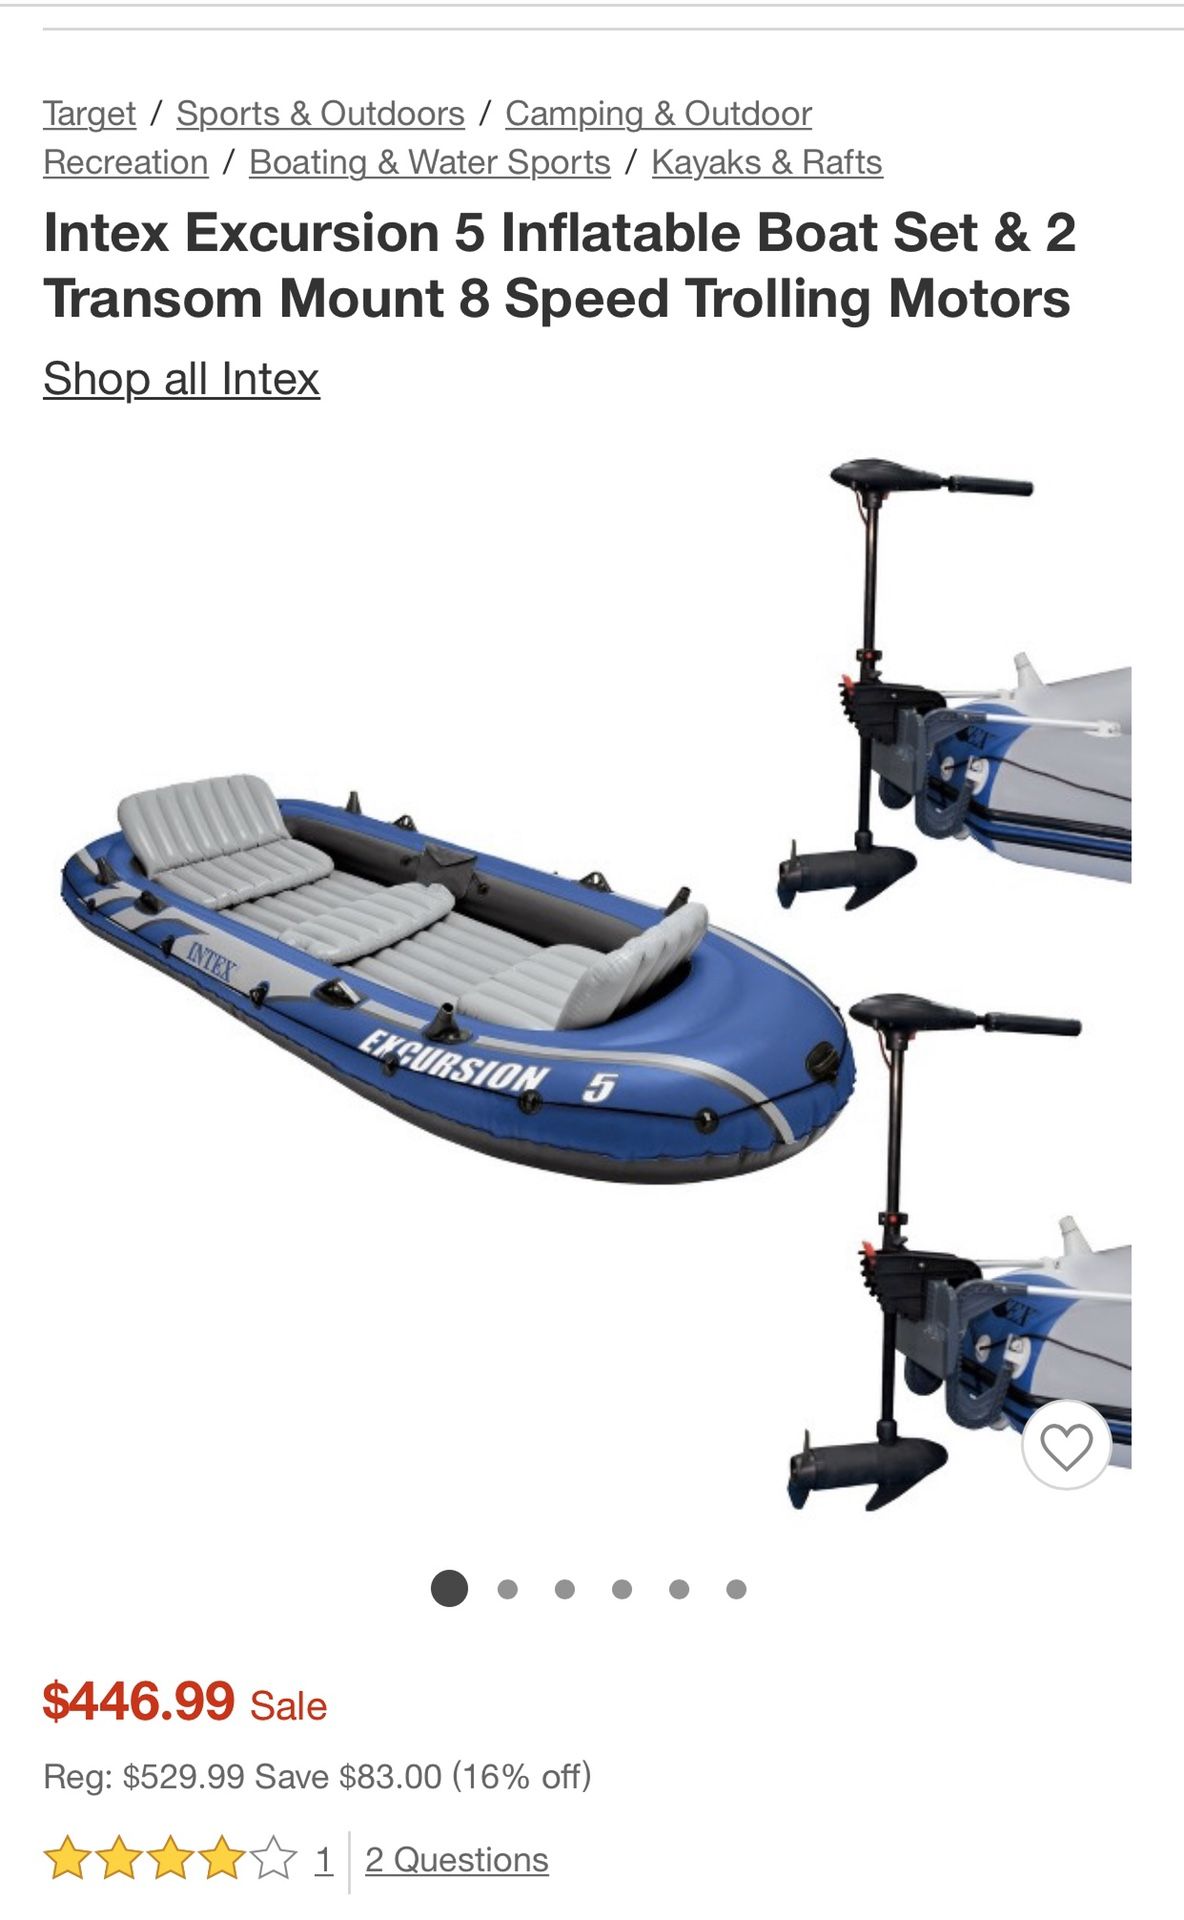 Intex excursion 5 inflatable boat set with electric motor and mont included